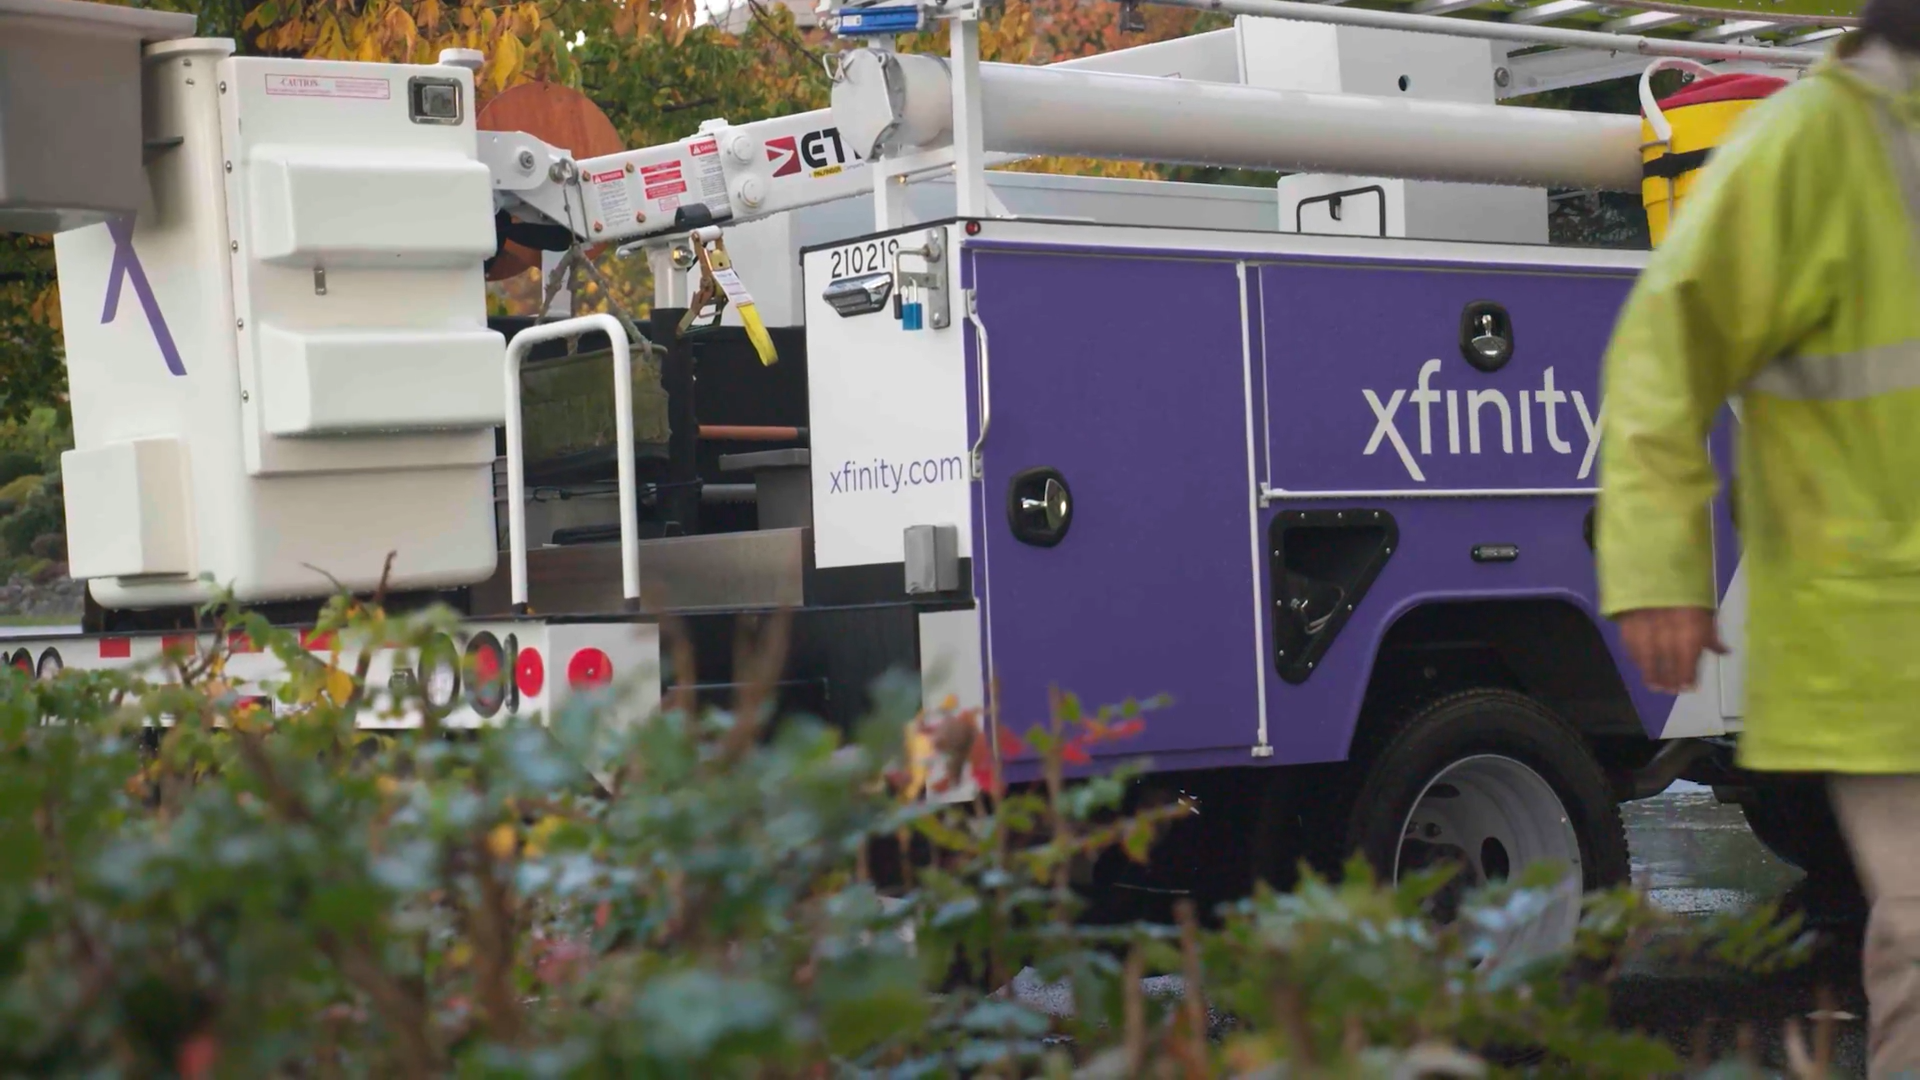 An Xfinity truck and a technician in a yellow jacket.